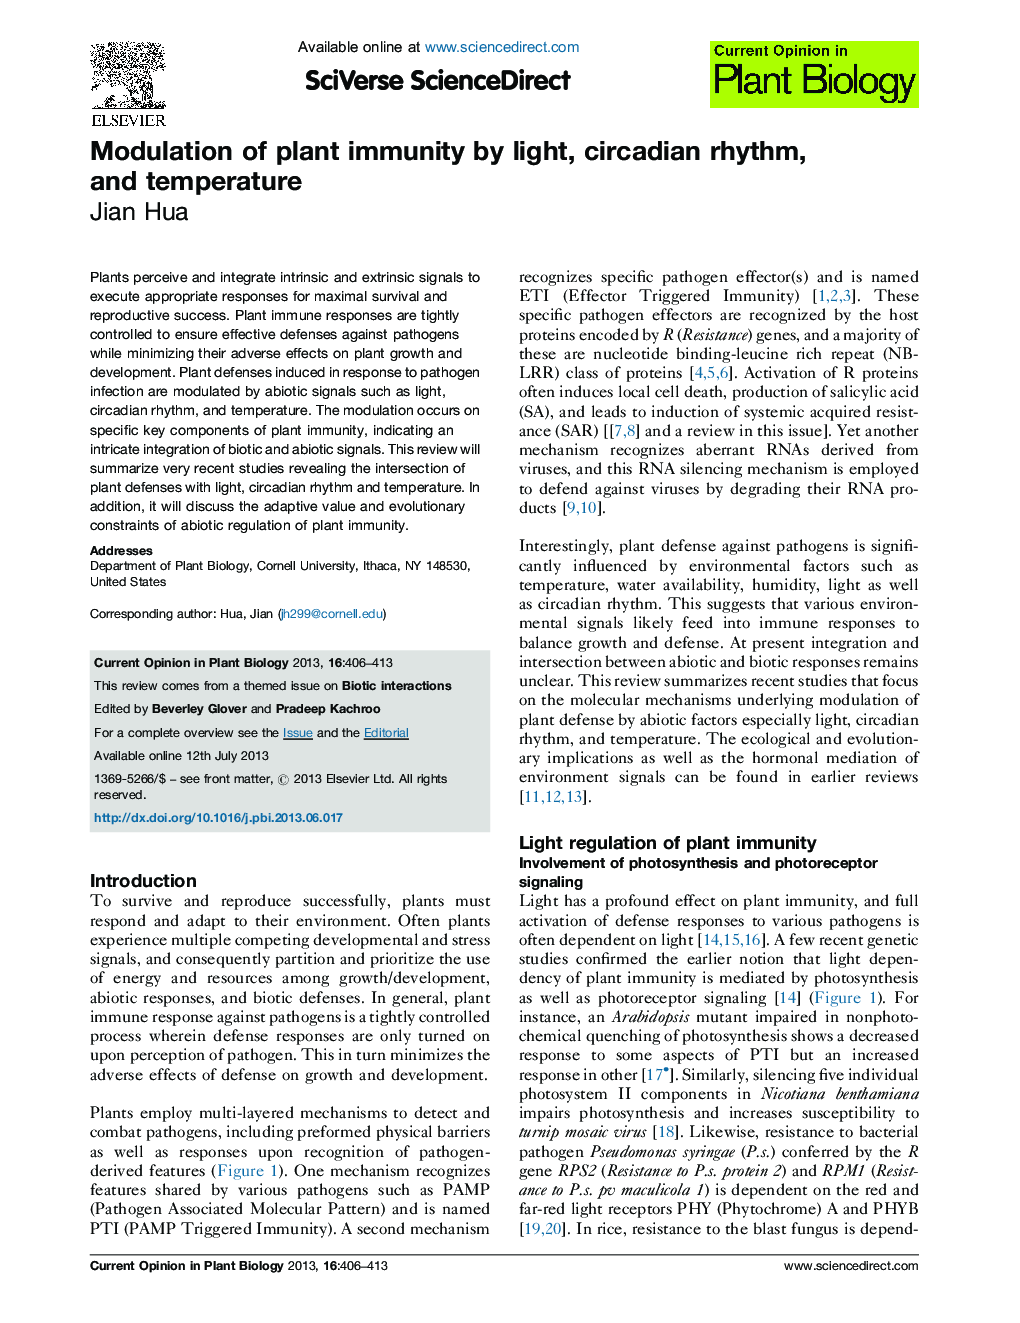 Modulation of plant immunity by light, circadian rhythm, and temperature